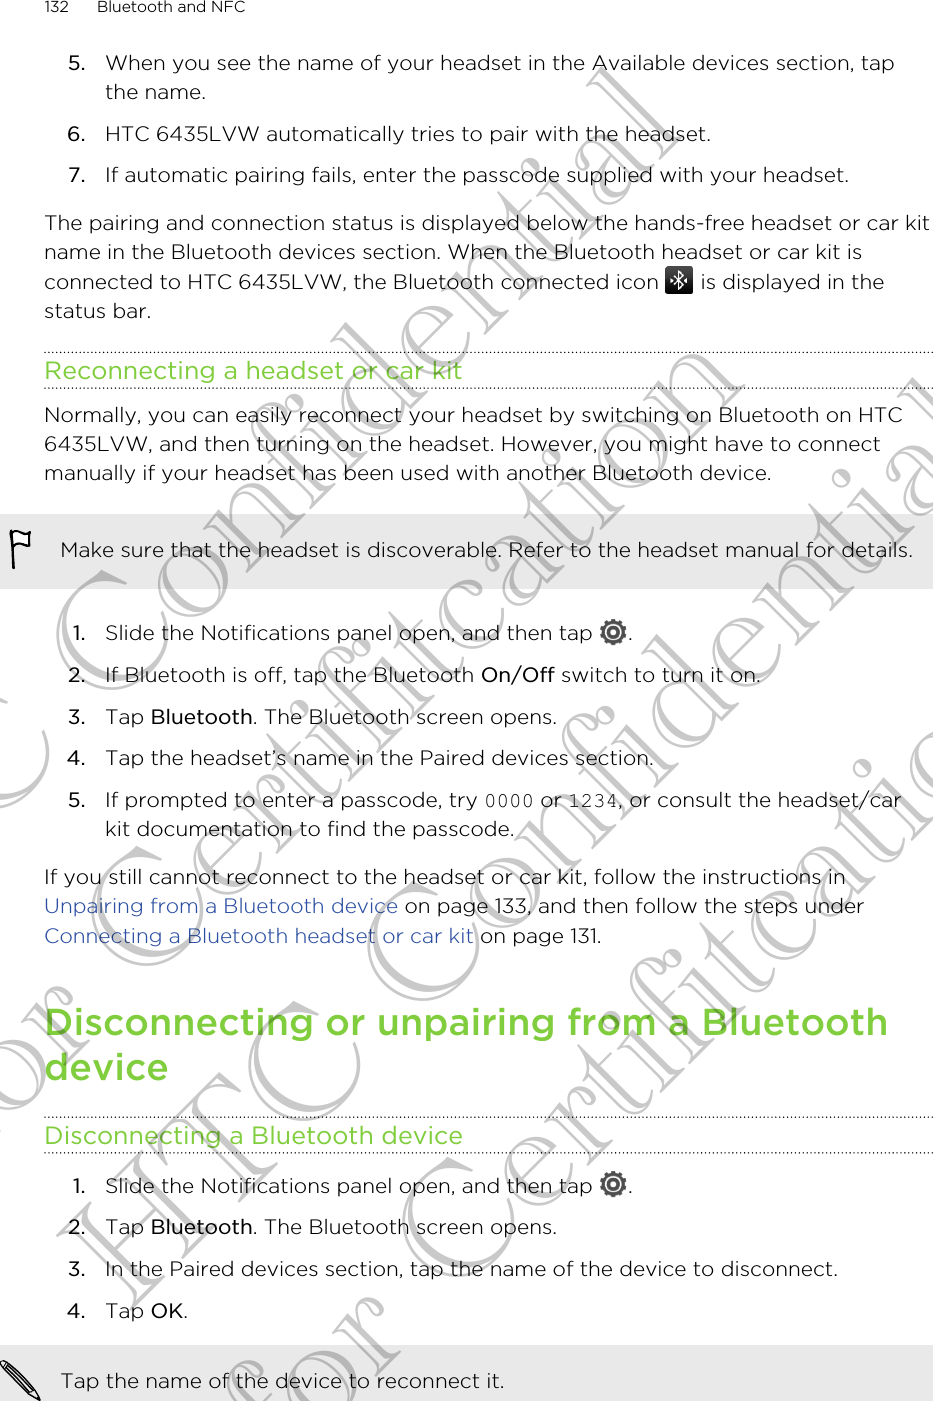 5. When you see the name of your headset in the Available devices section, tapthe name.6. HTC 6435LVW automatically tries to pair with the headset.7. If automatic pairing fails, enter the passcode supplied with your headset.The pairing and connection status is displayed below the hands-free headset or car kitname in the Bluetooth devices section. When the Bluetooth headset or car kit isconnected to HTC 6435LVW, the Bluetooth connected icon   is displayed in thestatus bar.Reconnecting a headset or car kitNormally, you can easily reconnect your headset by switching on Bluetooth on HTC6435LVW, and then turning on the headset. However, you might have to connectmanually if your headset has been used with another Bluetooth device.Make sure that the headset is discoverable. Refer to the headset manual for details.1. Slide the Notifications panel open, and then tap  .2. If Bluetooth is off, tap the Bluetooth On/Off switch to turn it on.3. Tap Bluetooth. The Bluetooth screen opens.4. Tap the headset’s name in the Paired devices section.5. If prompted to enter a passcode, try 0000 or 1234, or consult the headset/carkit documentation to find the passcode.If you still cannot reconnect to the headset or car kit, follow the instructions in Unpairing from a Bluetooth device on page 133, and then follow the steps under Connecting a Bluetooth headset or car kit on page 131.Disconnecting or unpairing from a BluetoothdeviceDisconnecting a Bluetooth device1. Slide the Notifications panel open, and then tap  .2. Tap Bluetooth. The Bluetooth screen opens.3. In the Paired devices section, tap the name of the device to disconnect.4. Tap OK.Tap the name of the device to reconnect it.132 Bluetooth and NFCHTC Confidential for Certifitcation HTC Confidential for Certifitcation